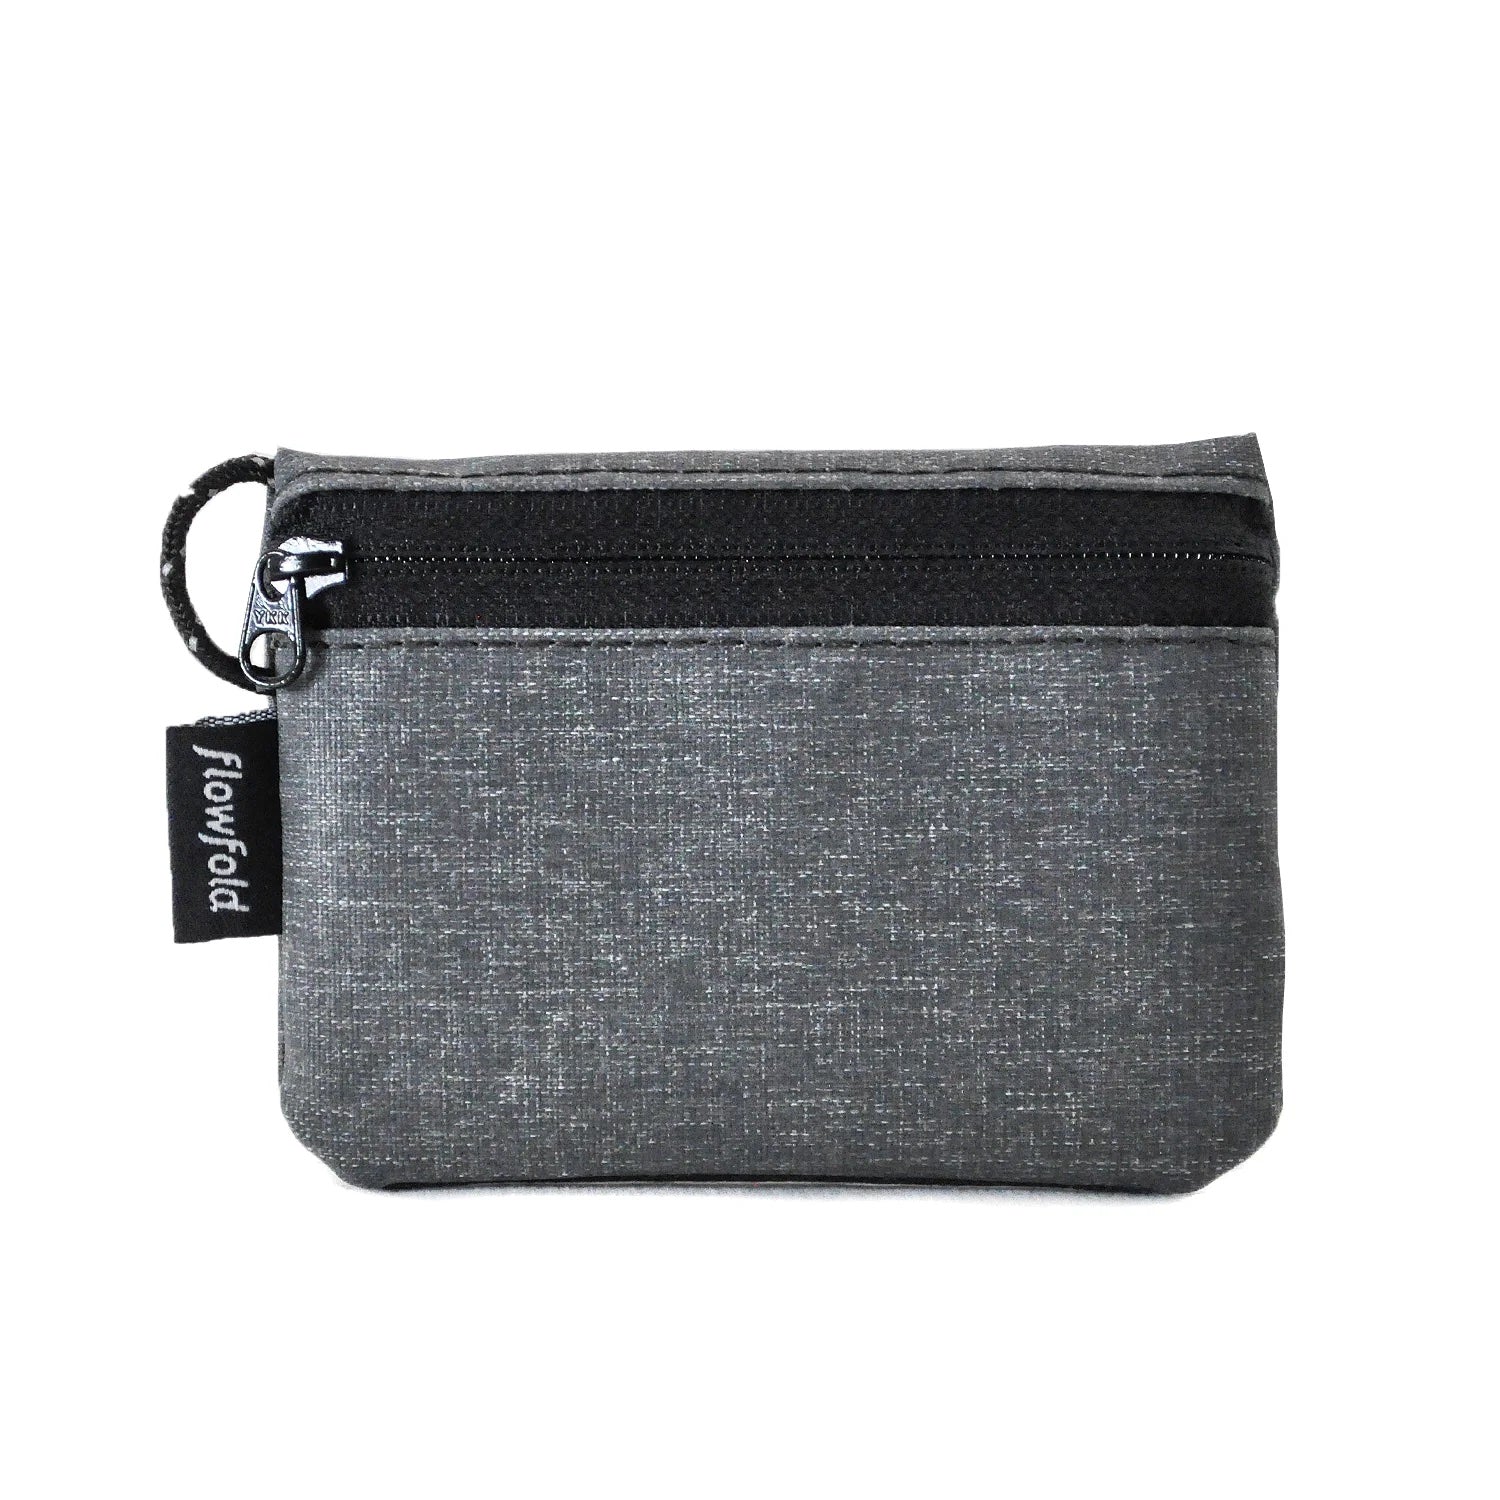 Flowfold Accessories - Laptop Cases, Cord Pouches & Toiletry Bags